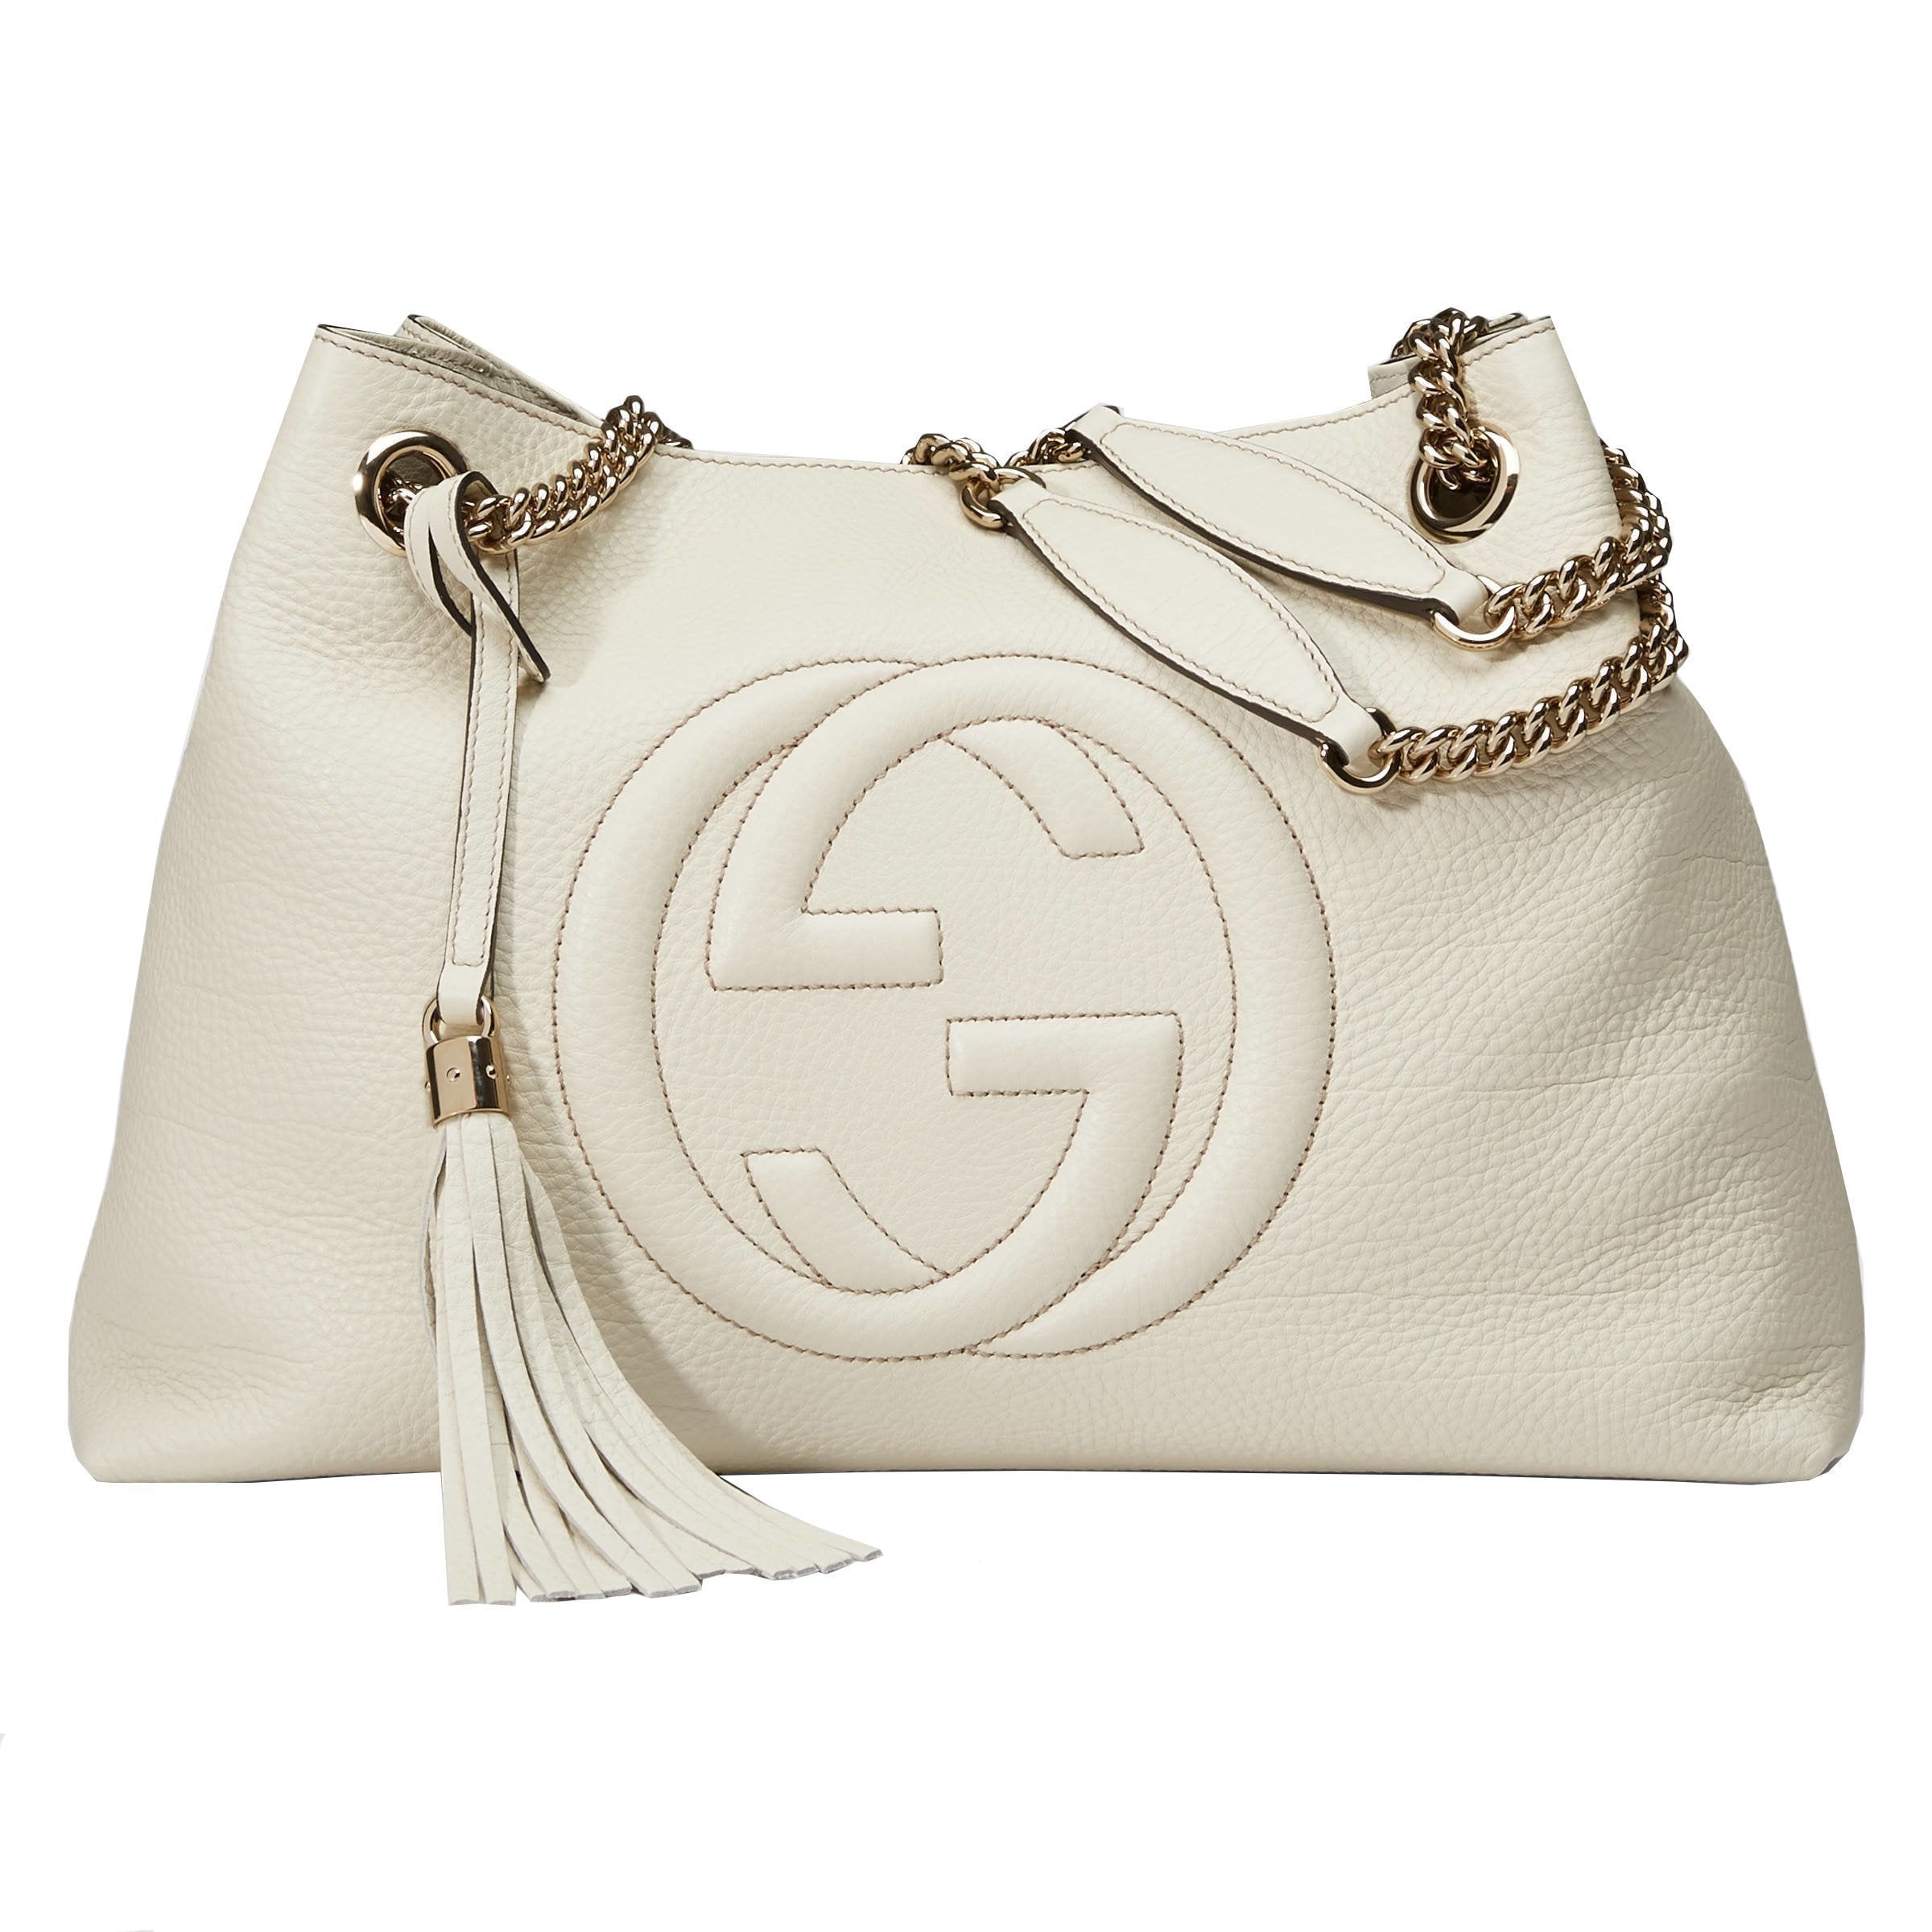  Gucci Soho Ivoire Ivory Gold Double Chain Soft Hobo Leather  Shoulder Bag Italy Authentic New : Clothing, Shoes & Jewelry